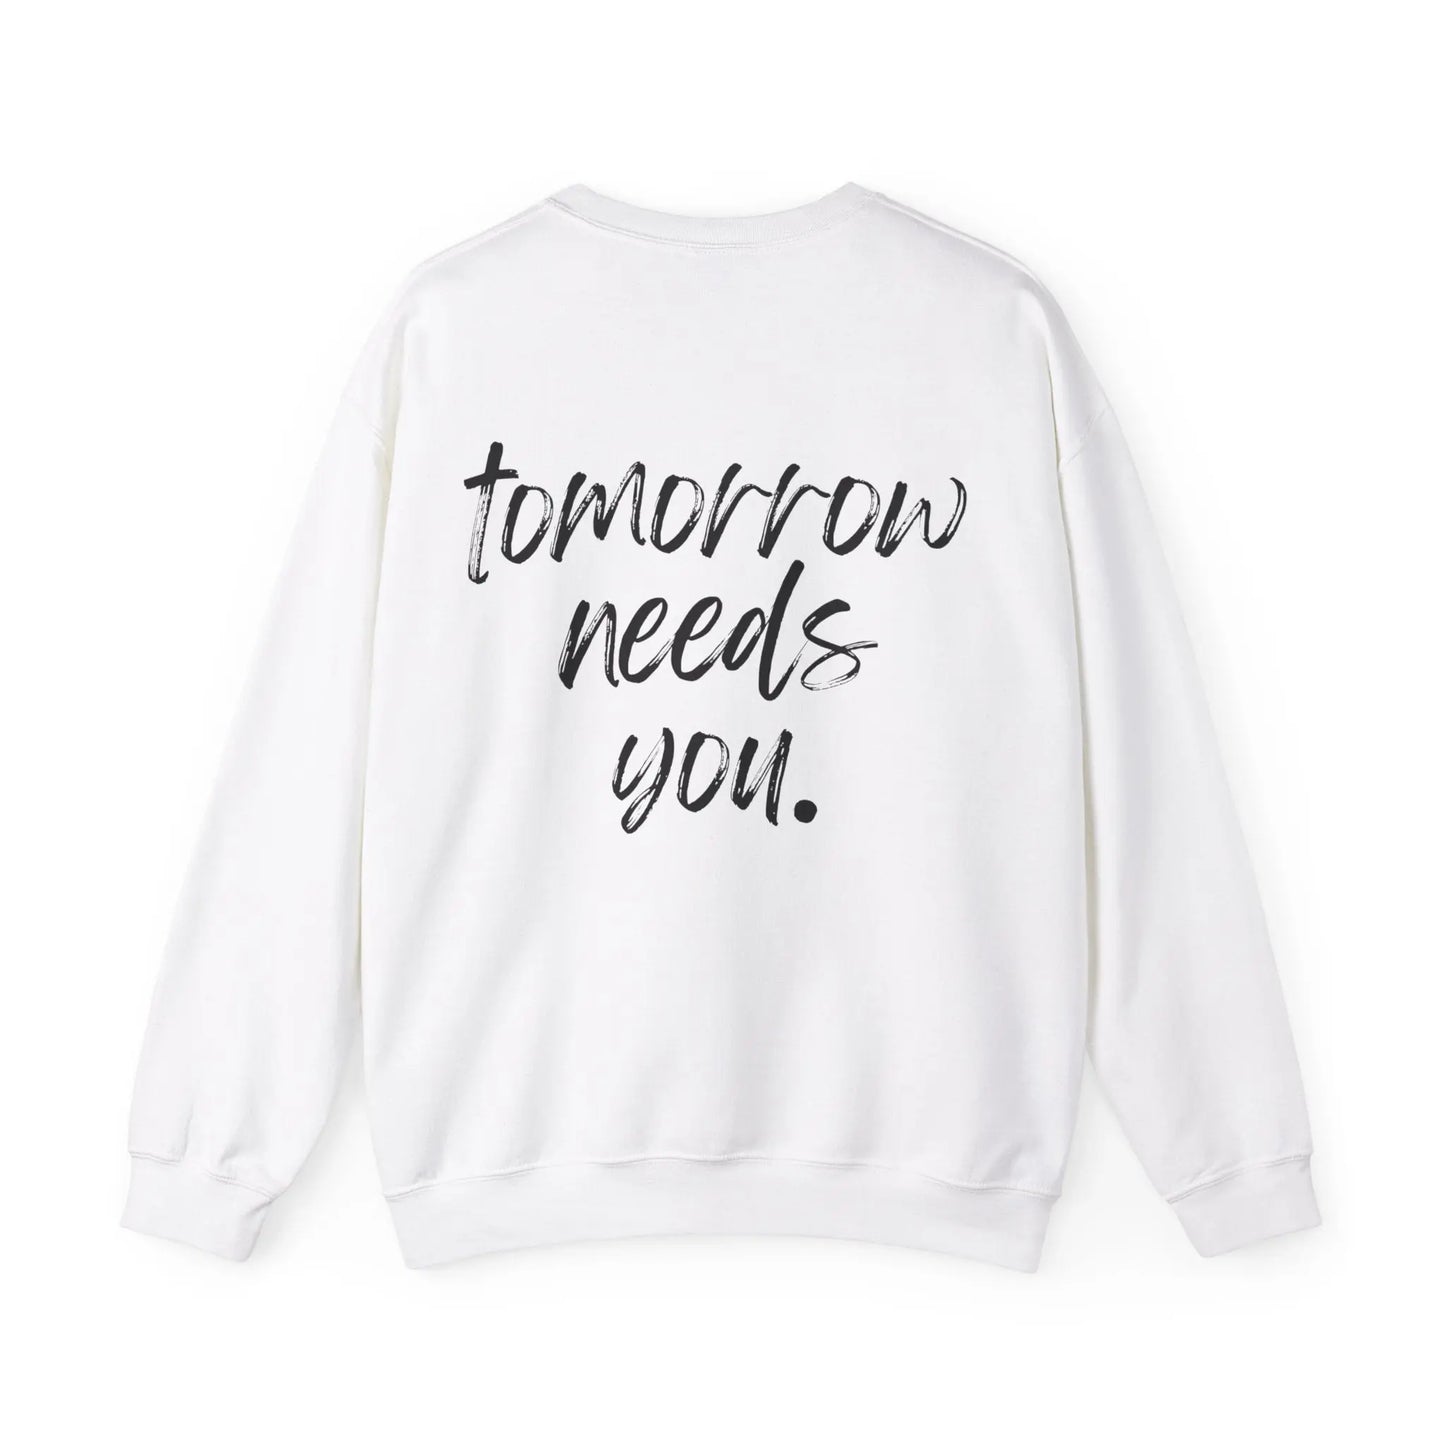 Stay Tomorrow Needs You Sweatshirt Mental Health Awareness Suicide Prevention Mothers Day Fathers Day Gift Veterans Support Military Gift Printify